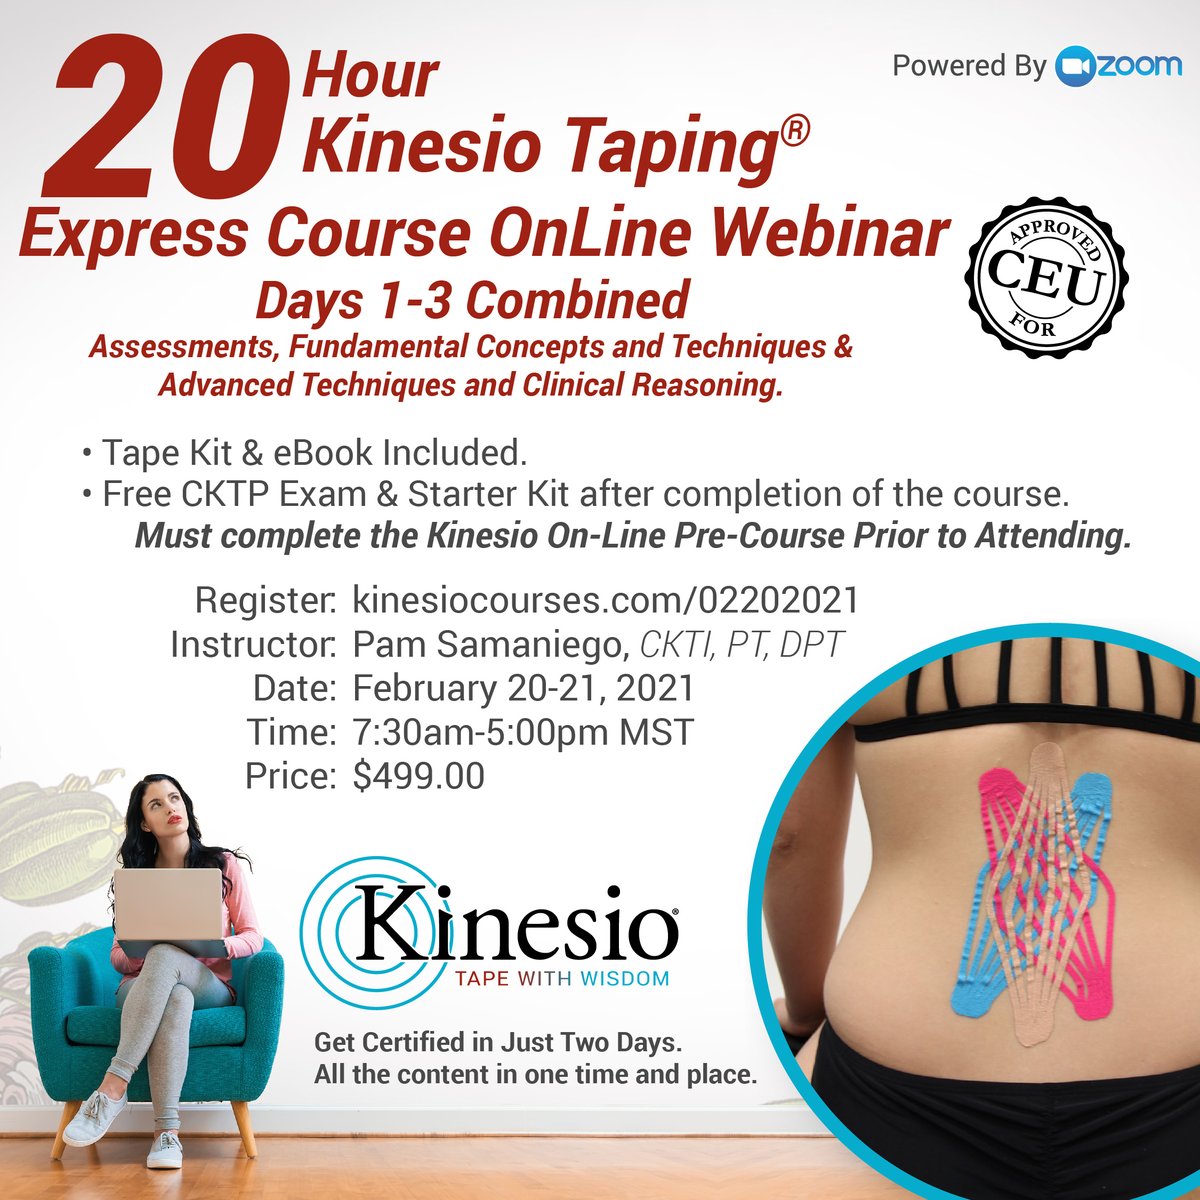 We still have space available, they are filling up fast.  Put your keys down , you do not have to drive do take our 2 day course, stay in the comfort of your home.
Register: kinesiocourses.com/02202021
#kinesiotape #painrelieft  #advancetaping  #online #certification
#tapewithwisdom